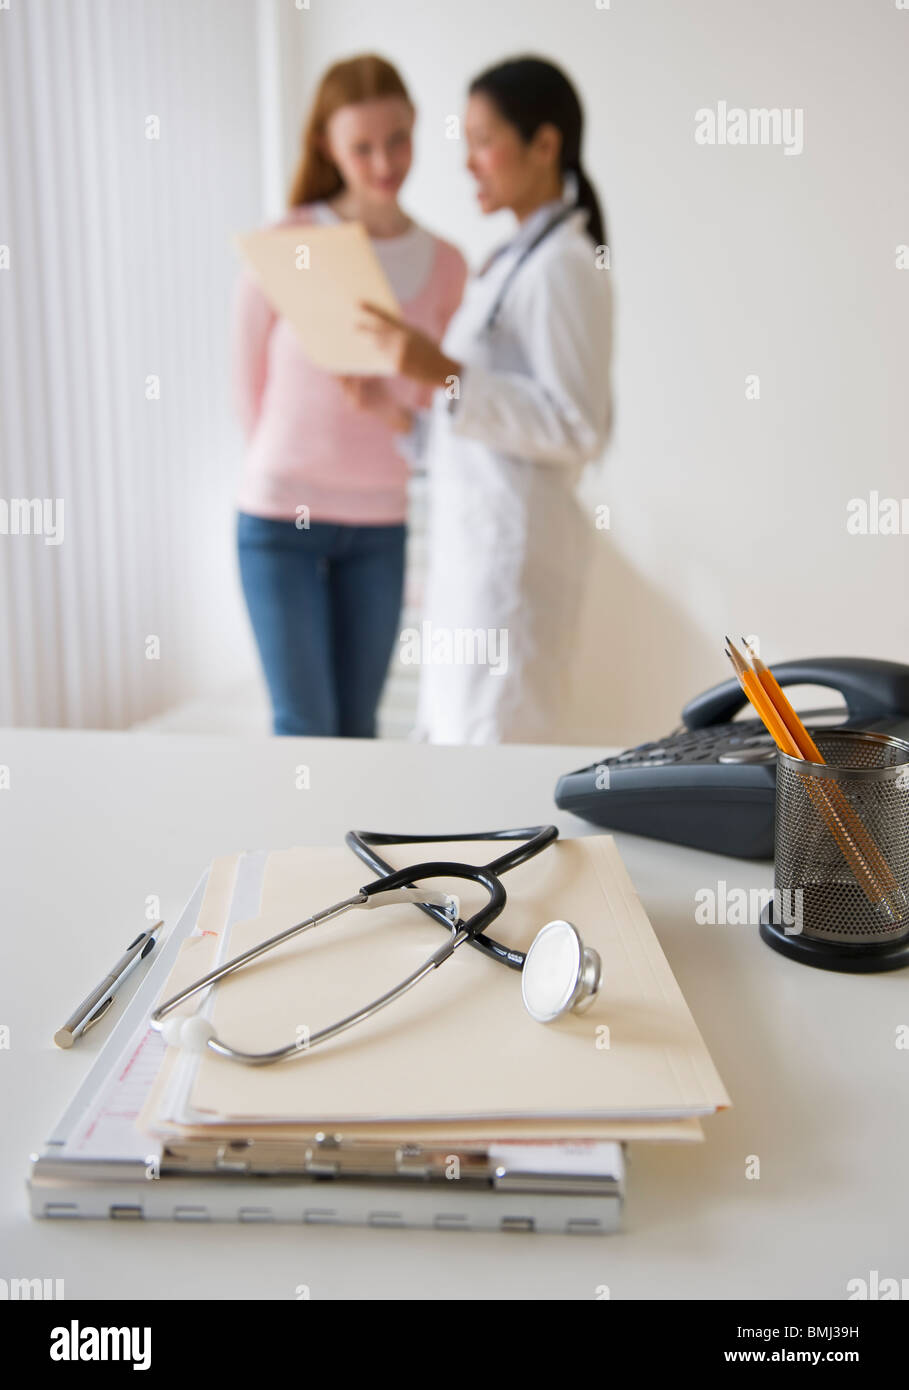 Doctor and patient consultation Stock Photo